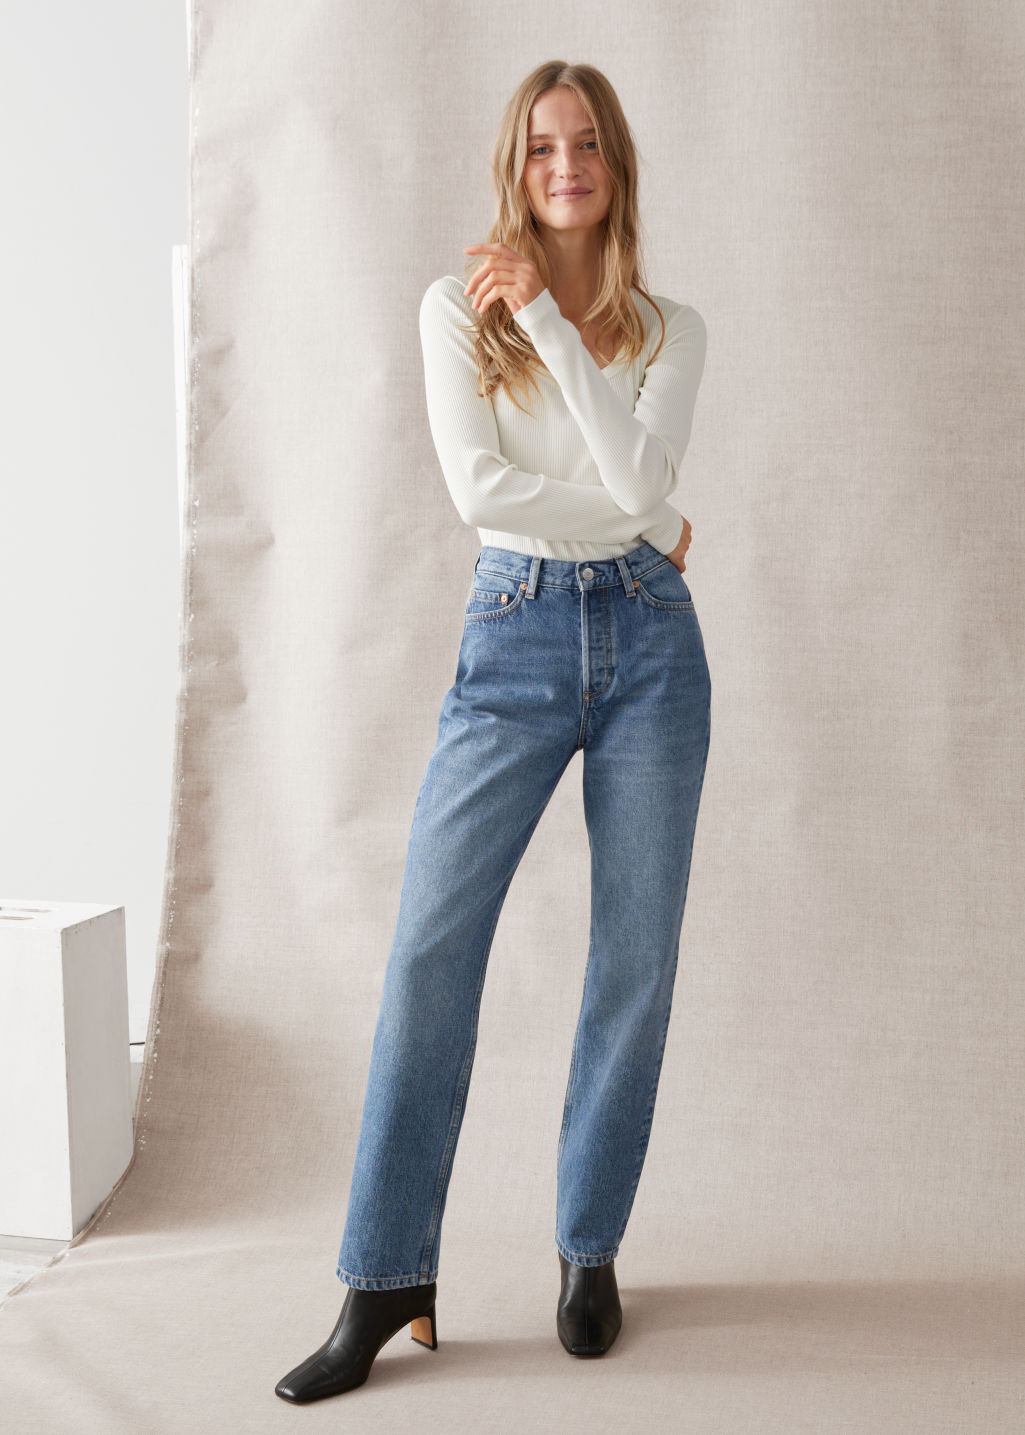 Keeper Cut Jeans - Light Blue - Jeans - & Other Stories